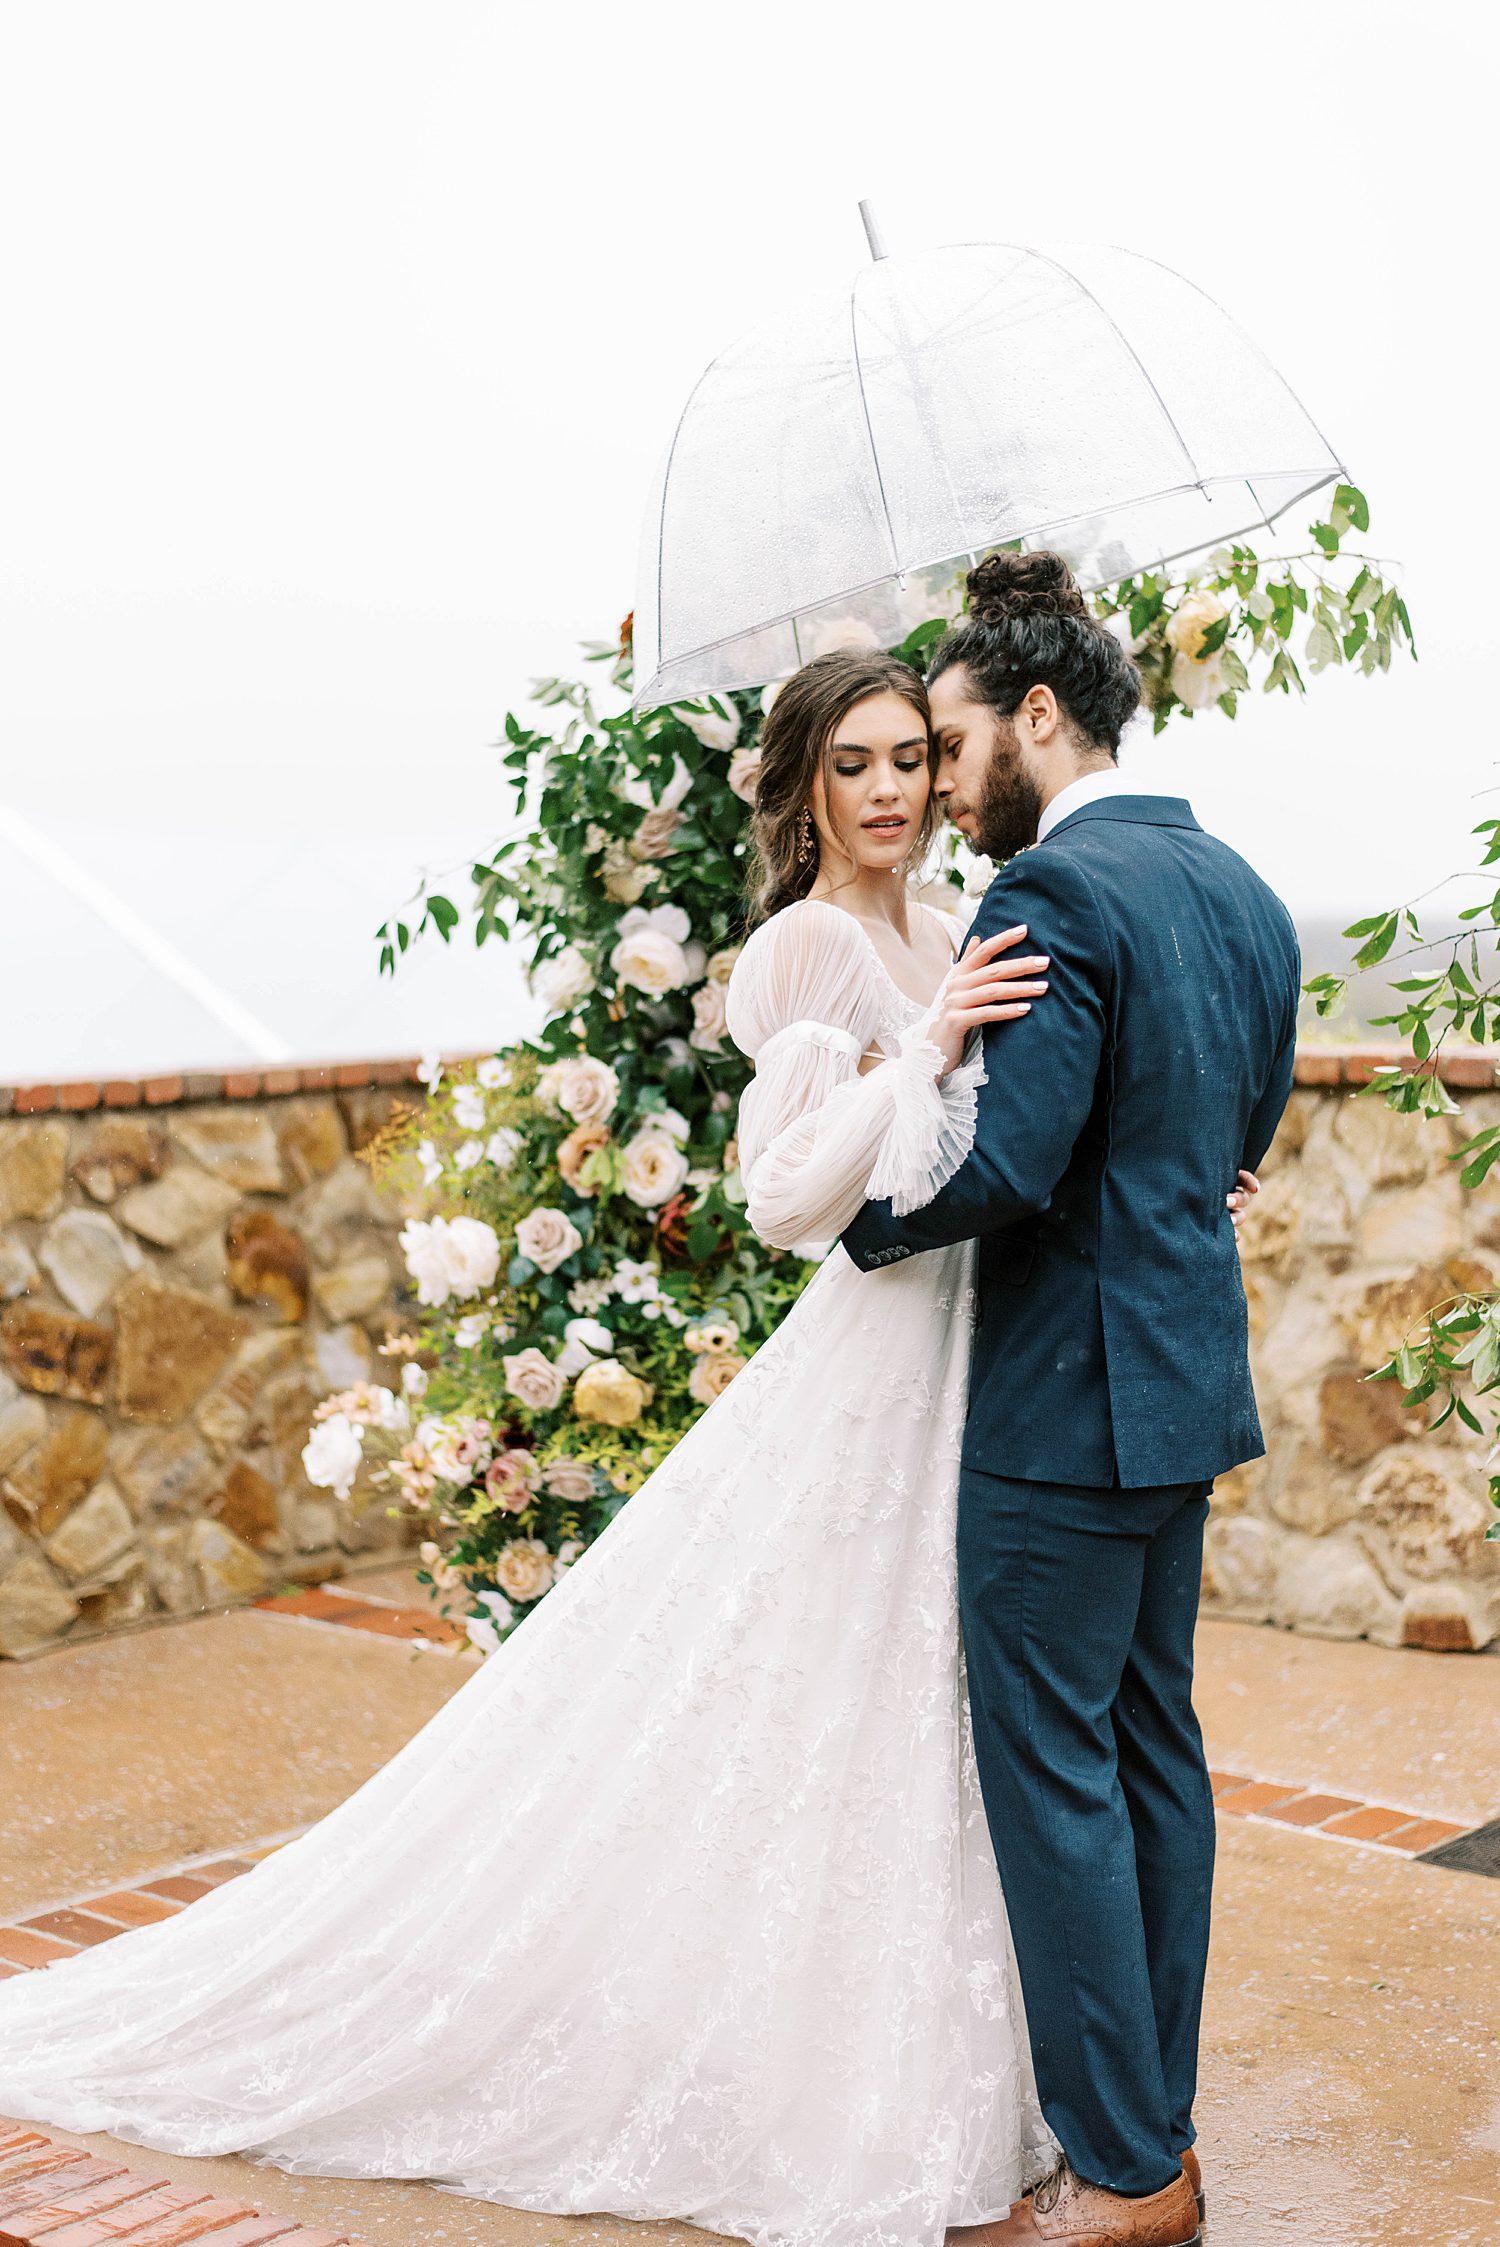 How to prepare for and embrace a rainy wedding day in Tampa Florida: tips to discuss plans with your wedding vendors for Plan A, B, and C